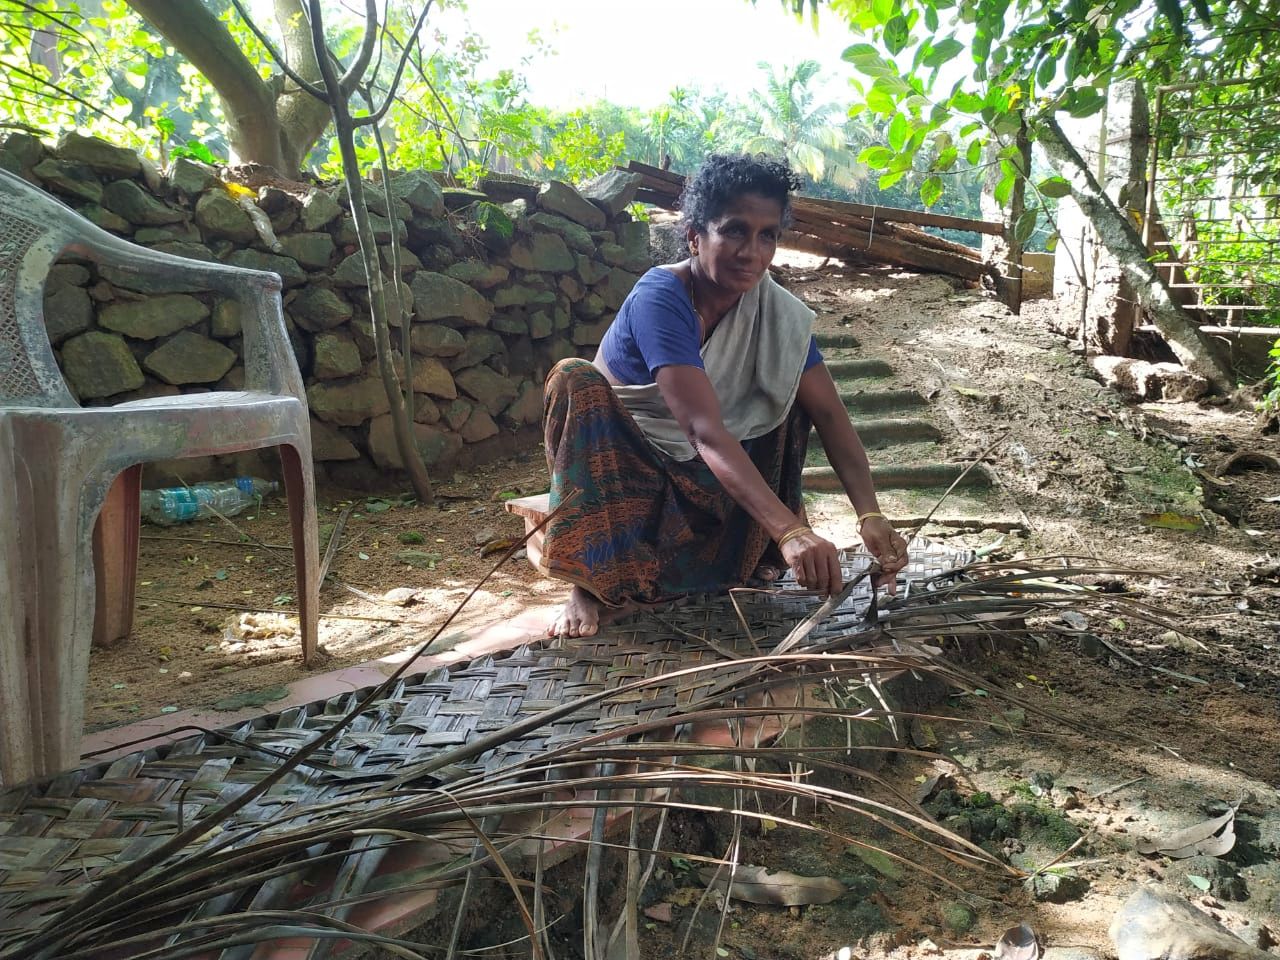 Weaving leaves for an income (Image: Gby Atee)